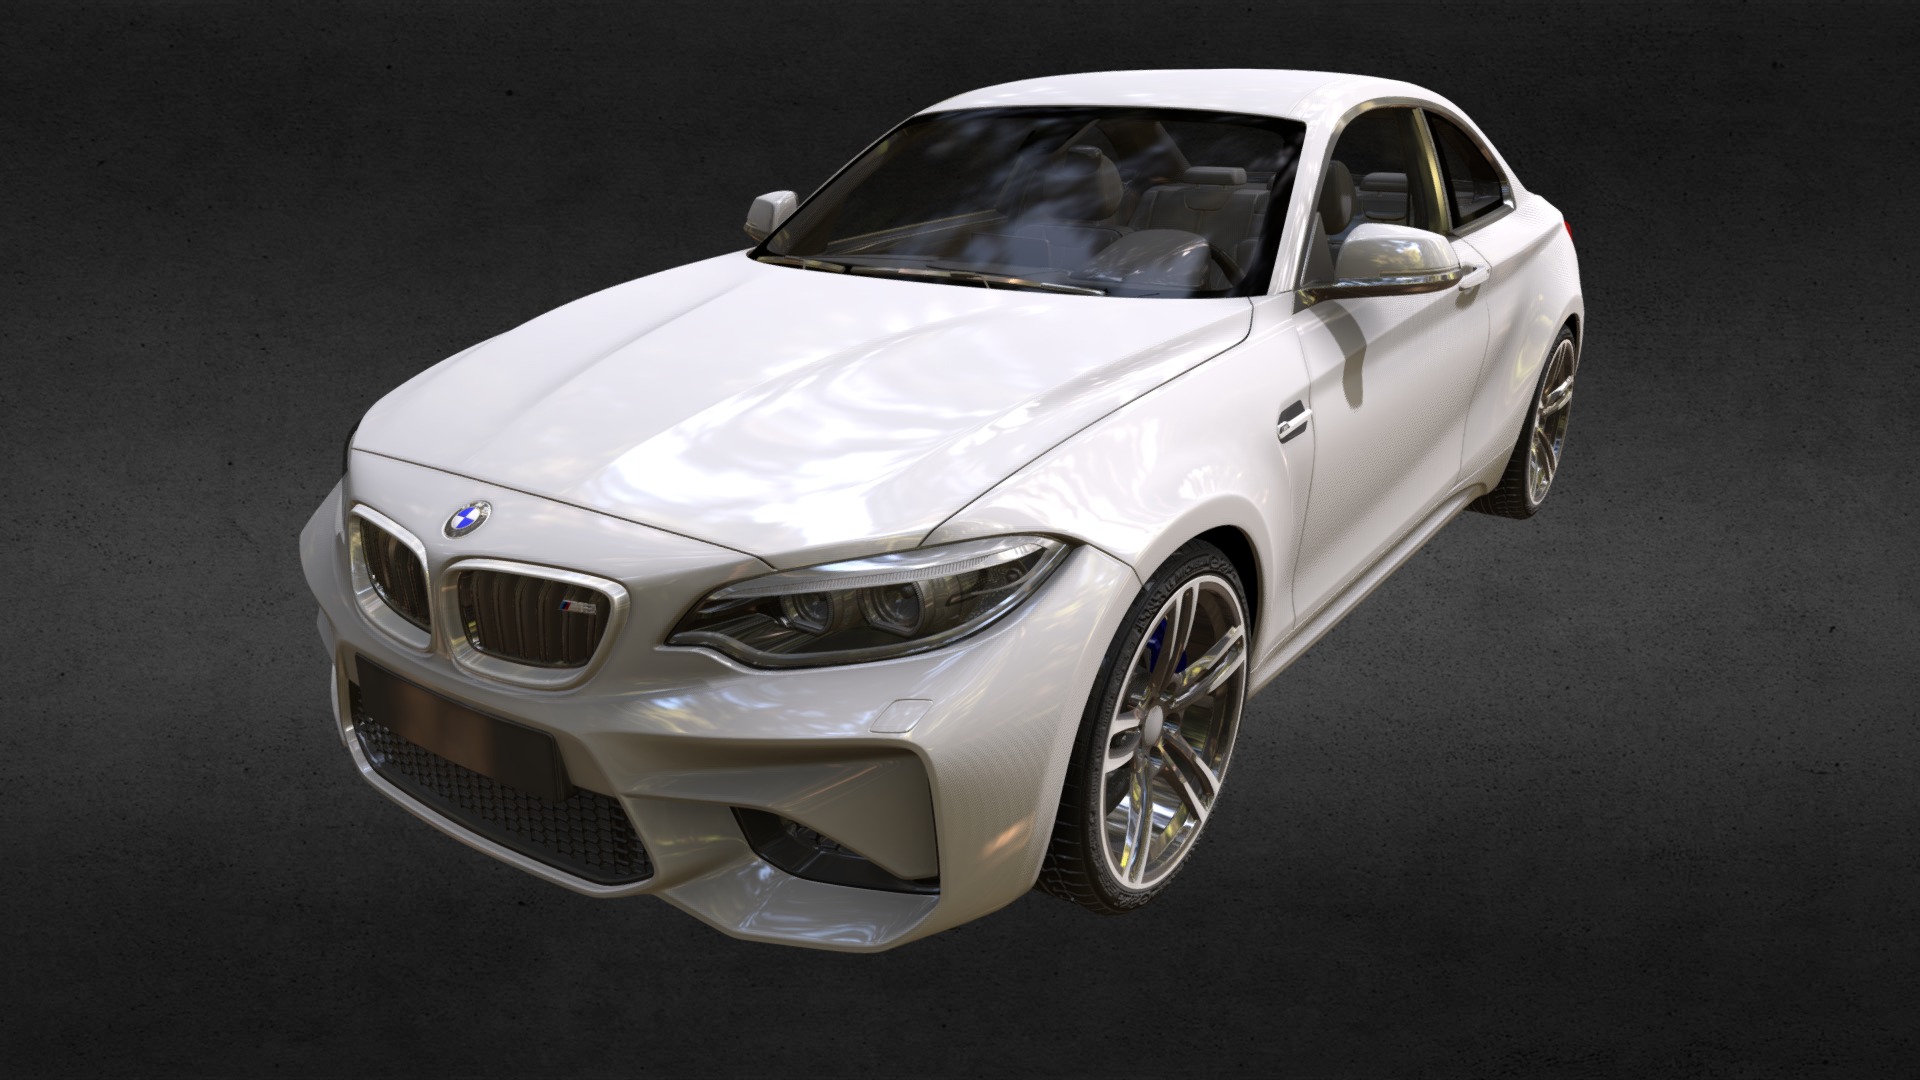 BMW M2  3D model
Features: 
- High quality polygonal model - correctly scaled accurate representation of the original objects. 
- Model resolutions are optimized for polygon efficiency (in 3DS MAX the meshsmooth function can be used to increase mesh resolution if necessary). 
- All colors can be easily modified. 
- Model is fully textured with all materials applied. 
- All textures and materials are included and mapped in every format. 
- Max models grouped for easy selection &amp; objects are logically named for ease of scene management. 
- No part-name confusion when importing several models into a scene. 
- No cleaning up necessary, just drop your models into the scene and start rendering. 
- No special plugin needed to open scene 3d model